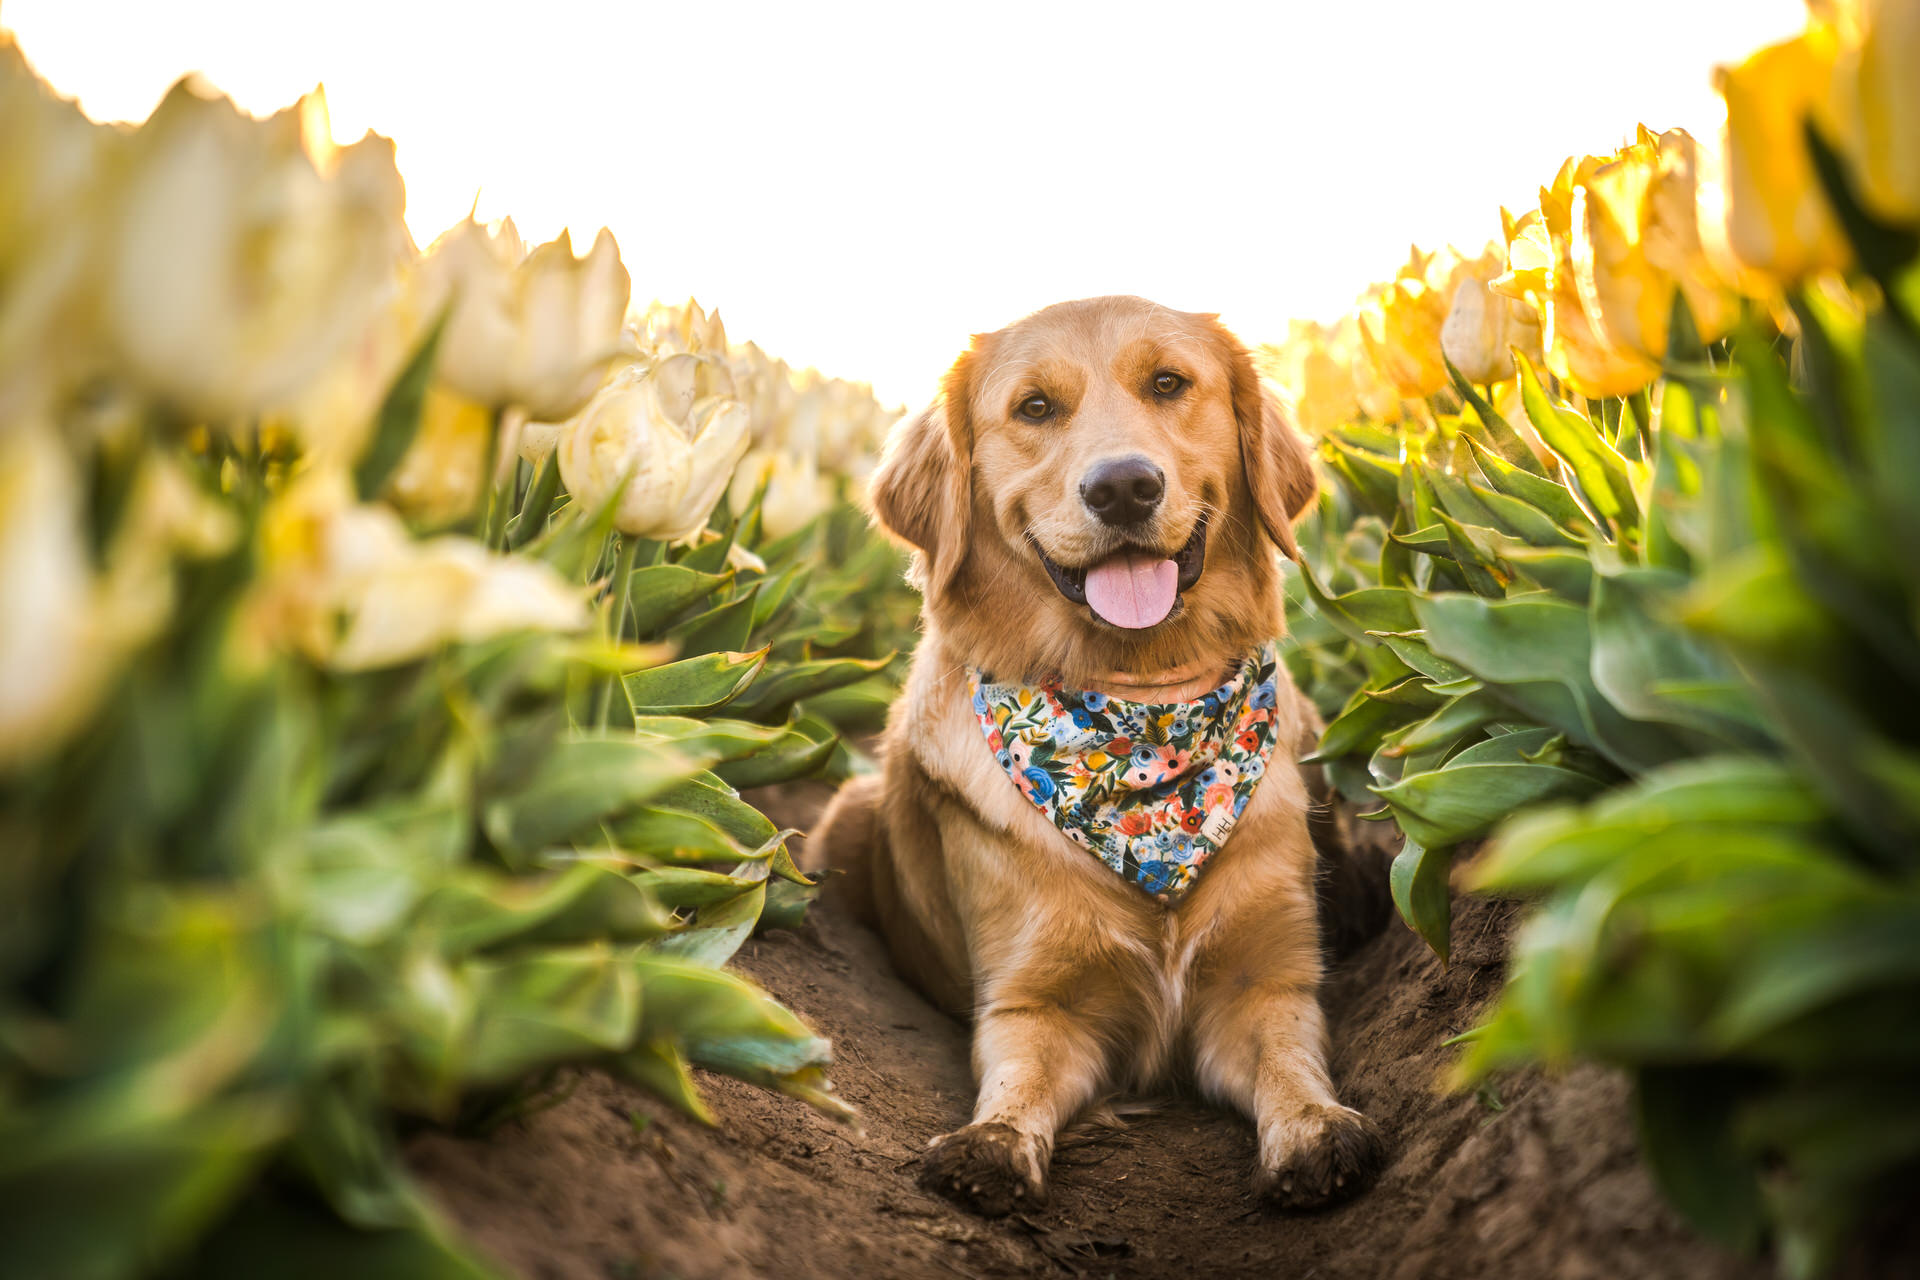 Wooden shoe tulip farm dog laying in flowers